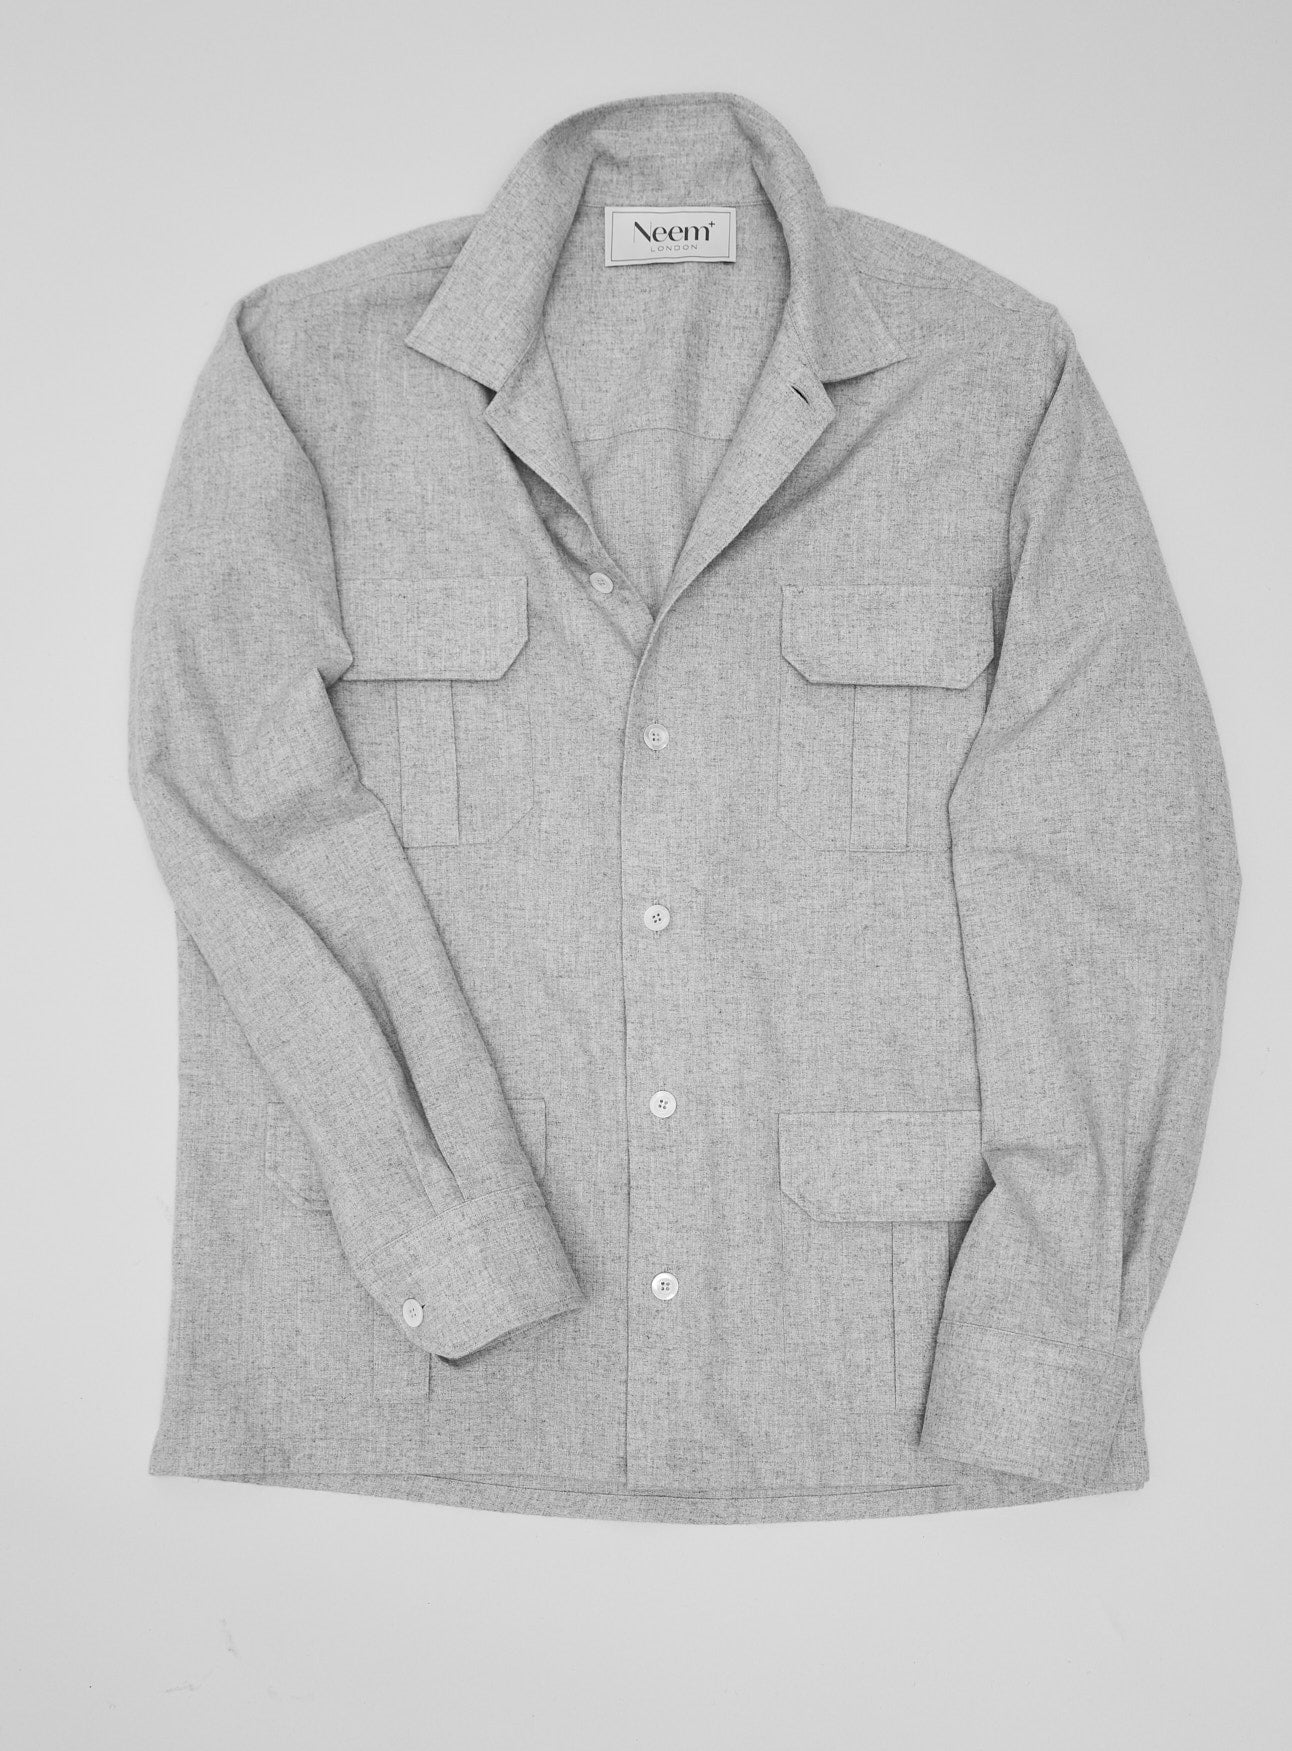 grey overshirt, recycled cotton